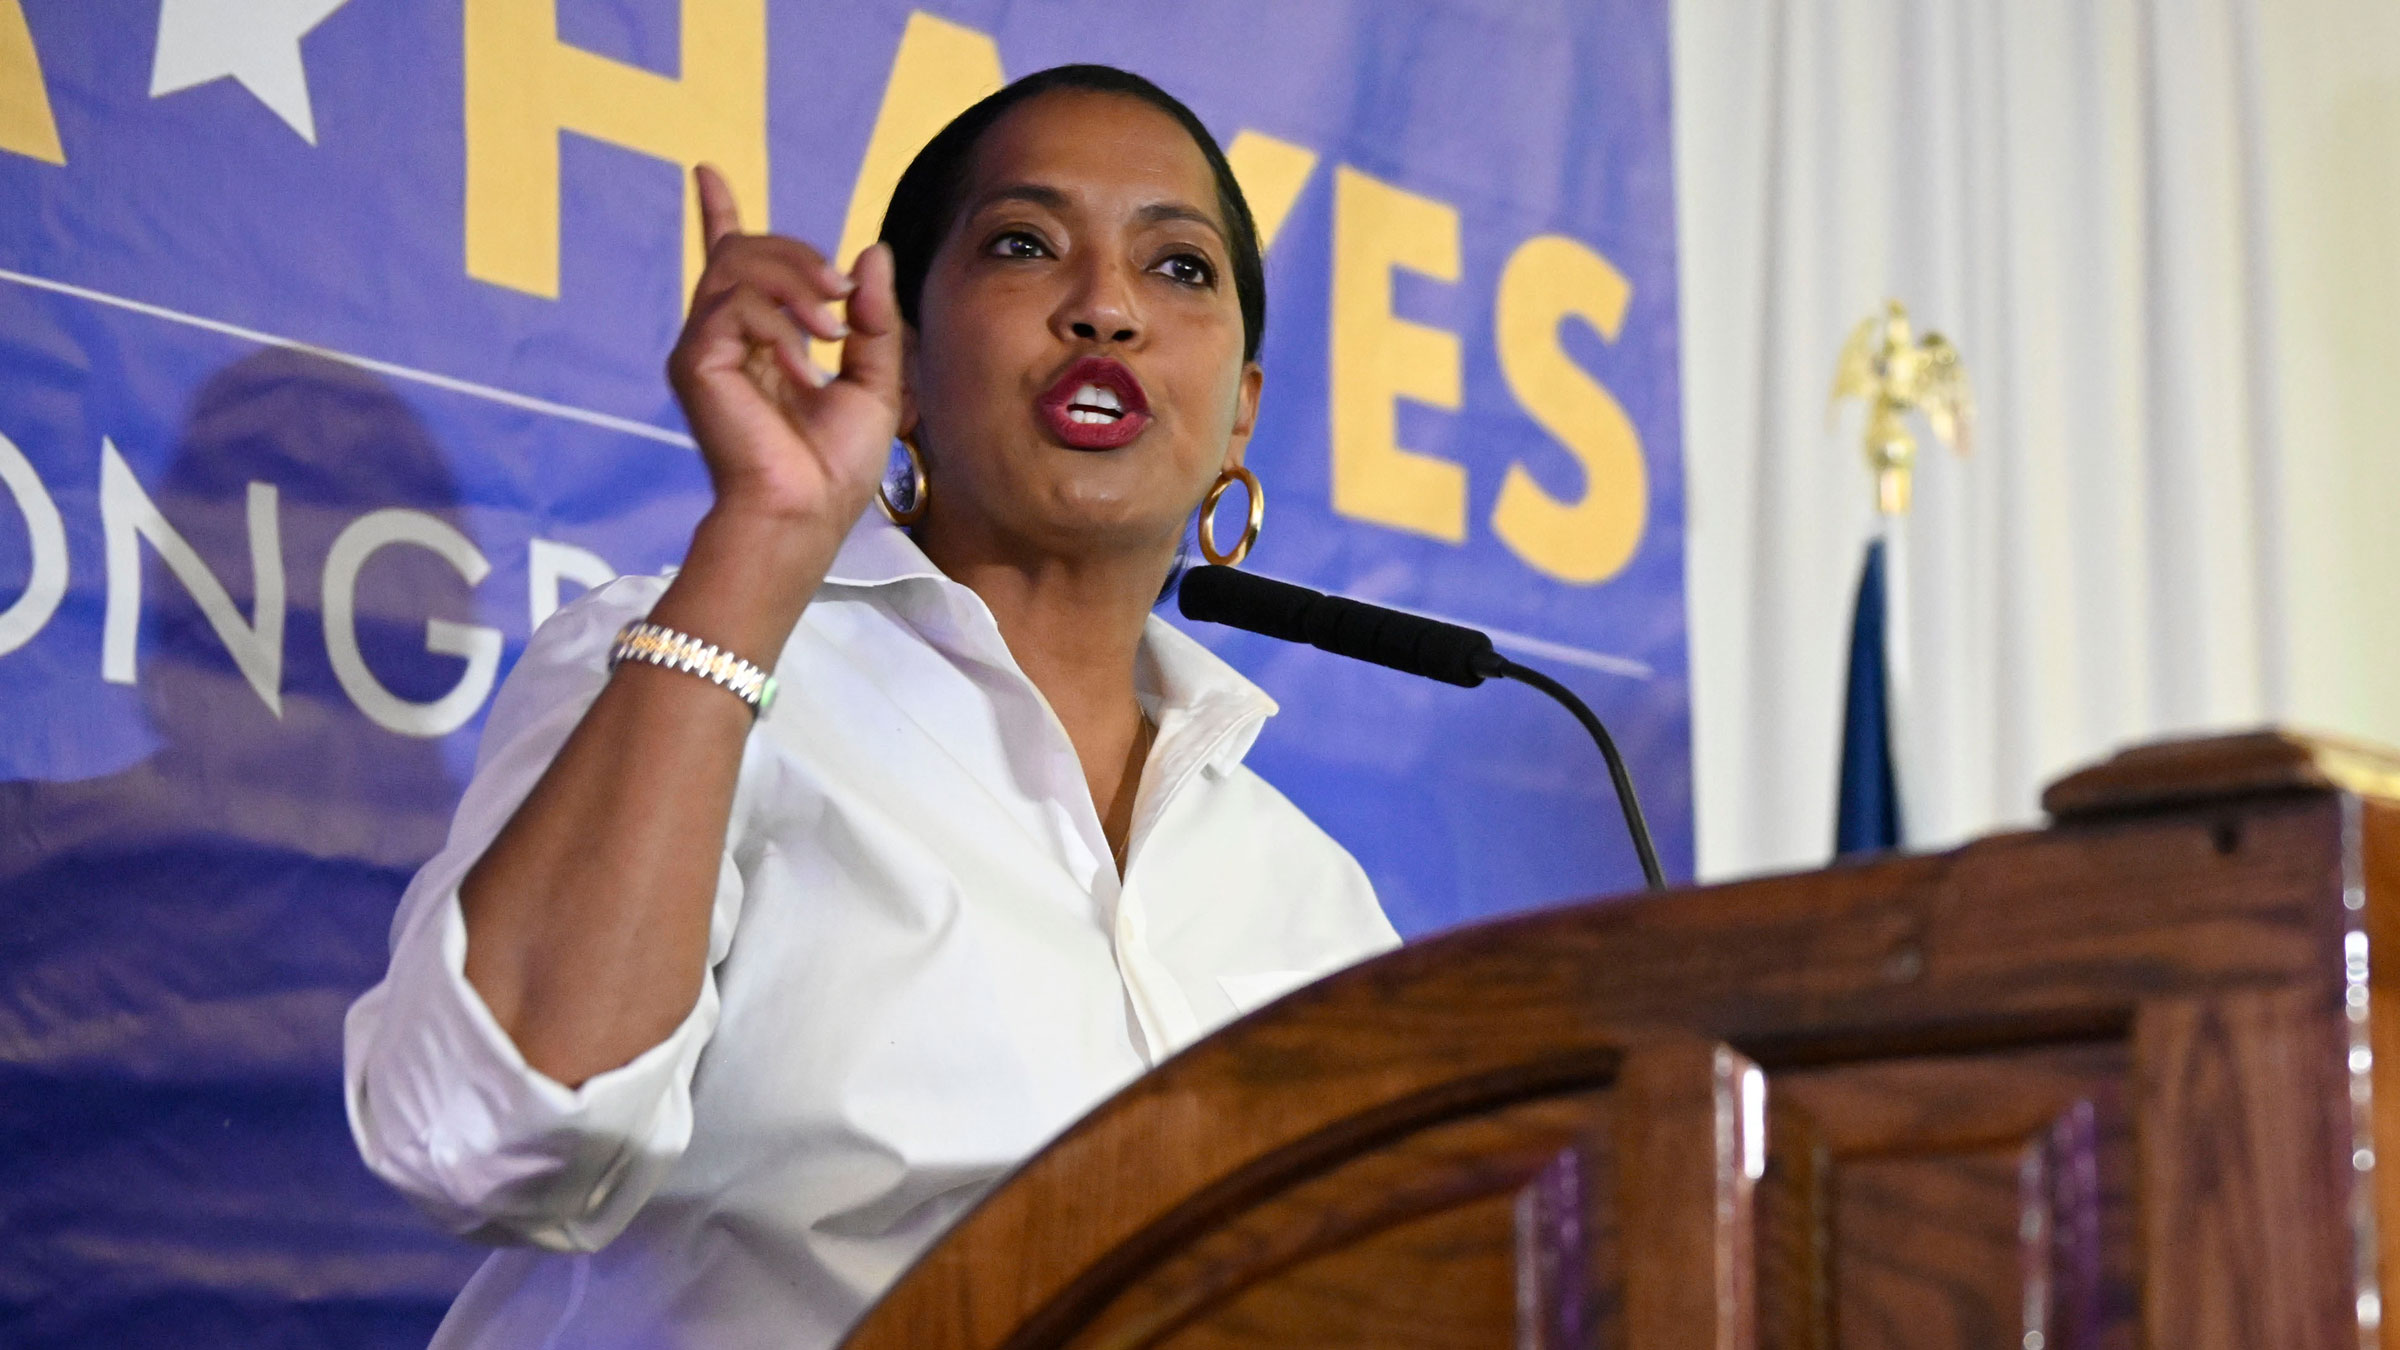 US Rep. Jahana Hayes speaks to supporters at her election night event in Waterbury, Connecticut.